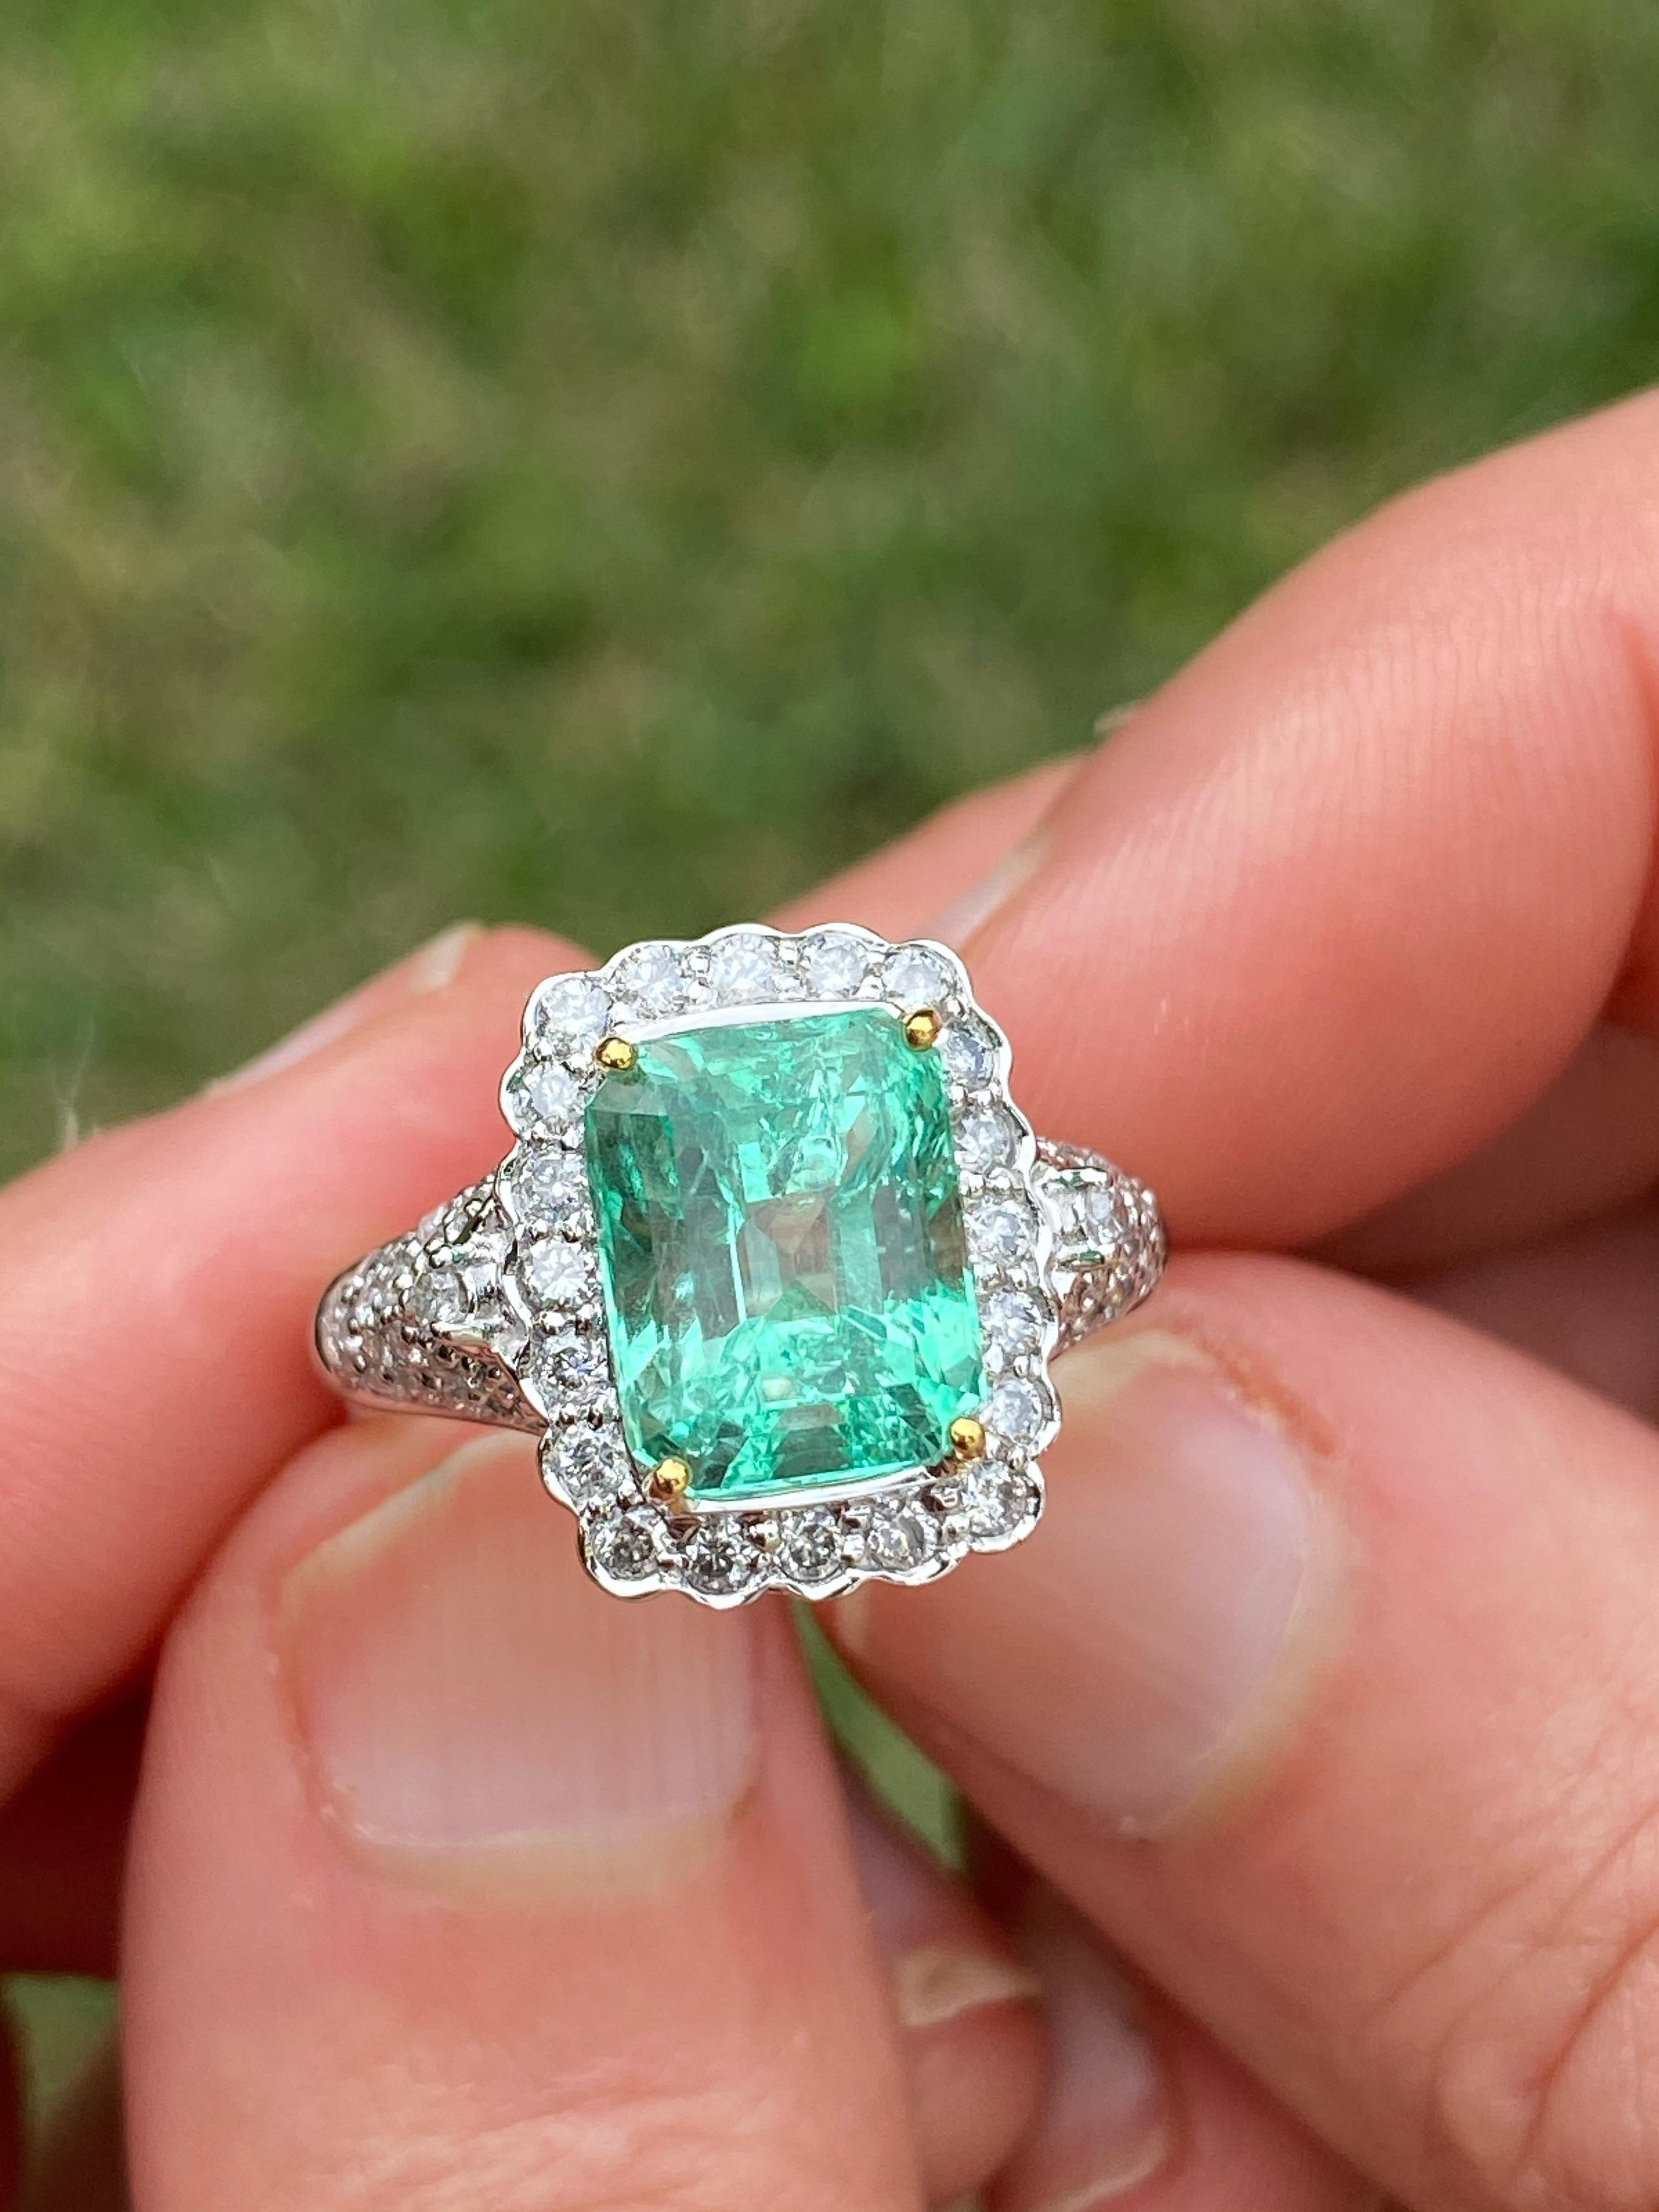 Centering a 3.58 Carat Emerald-Cut Colombian Emerald, accented by 0.71 Carats of Round-Brilliant Cut Diamonds, and set in 18K White Gold.

Details:
✔ Stone: Emerald
✔ Center-Stone Weight: 3.58 carats
✔ Stone Cut: Emerald
✔ Stone Color: Green
✔ Stone